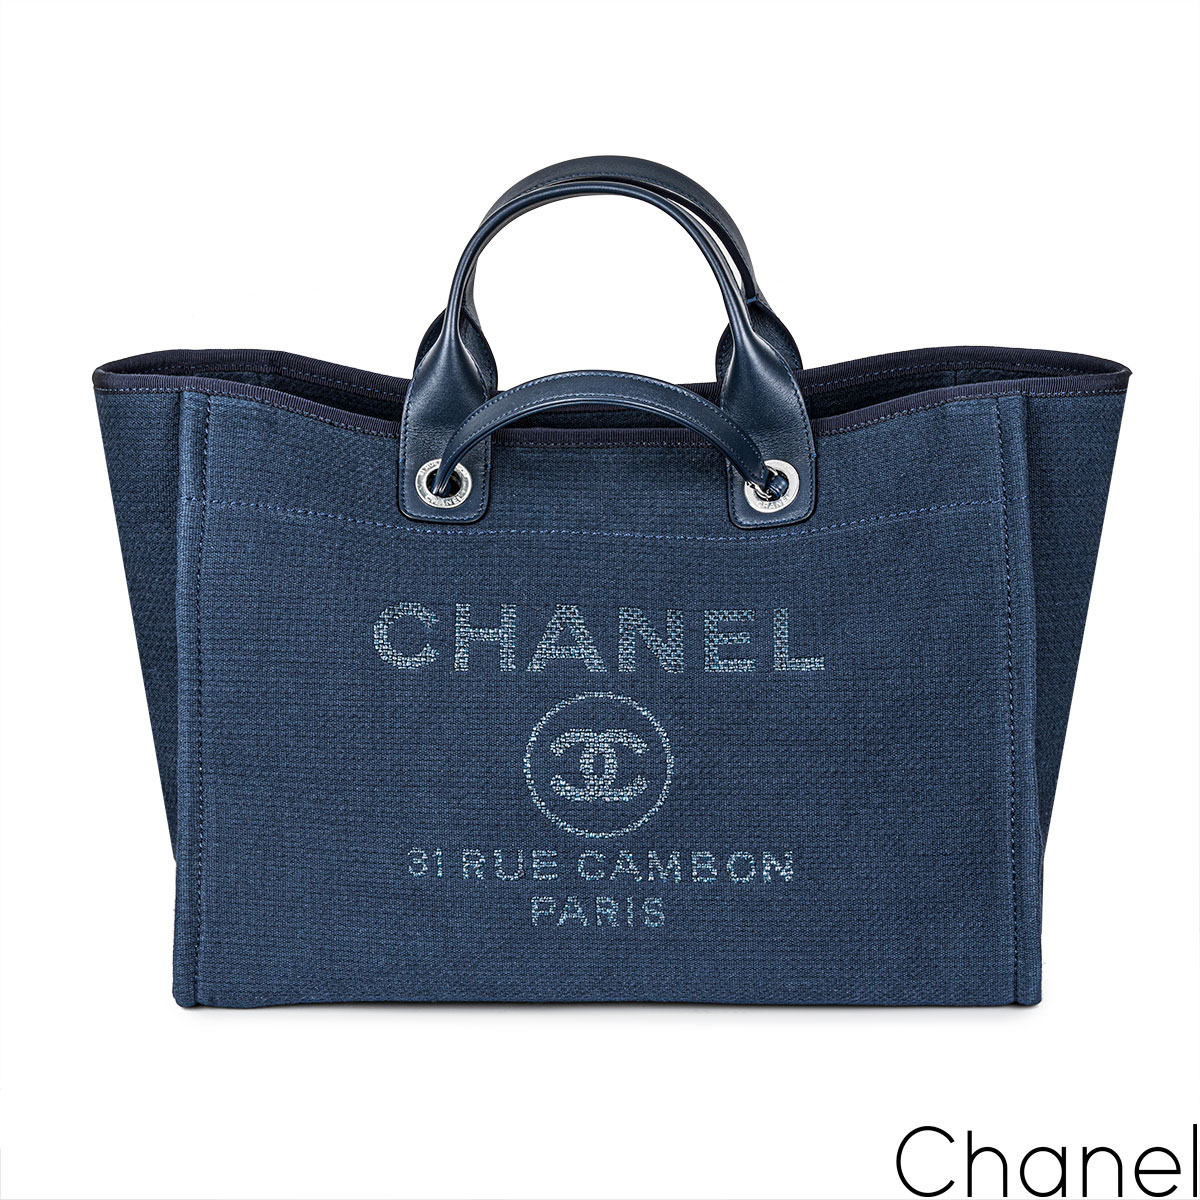 CHANEL Caviar Quilted Business Affinity Backpack Light Blue  FASHIONPHILE   Stylish backpacks Chanel caviar Light backpack